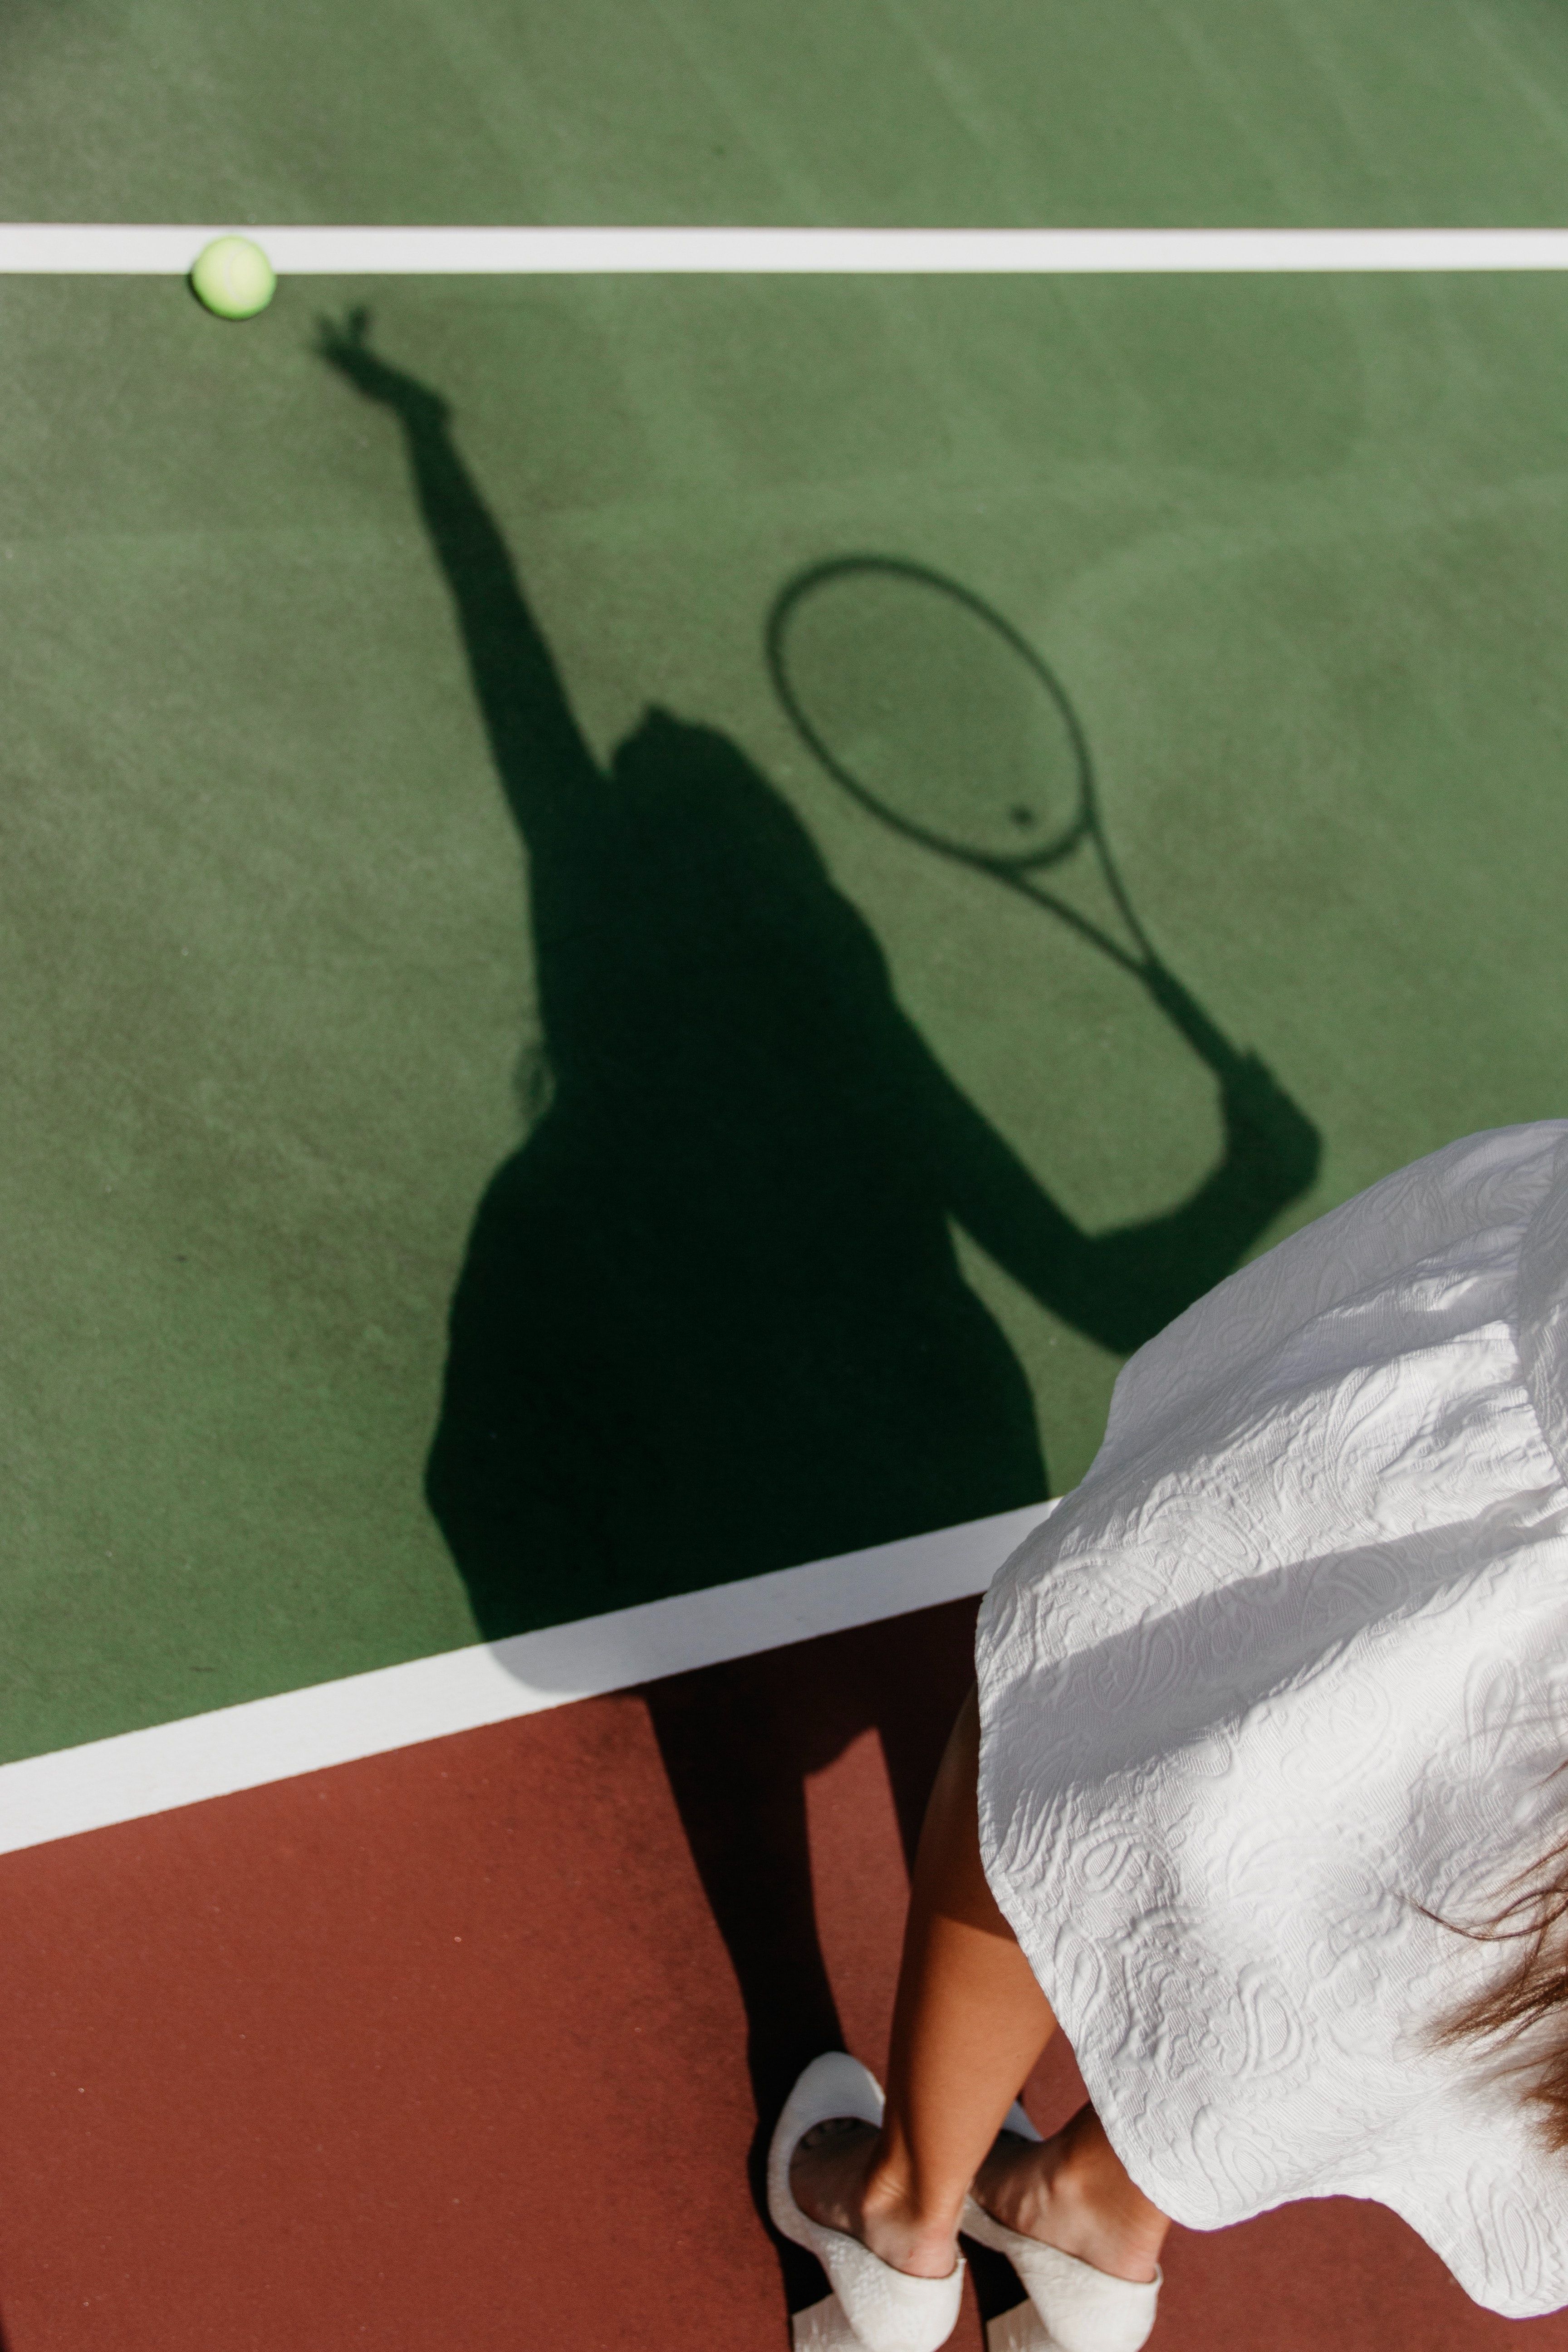 A woman playing tennis with her shadow on the court - Tennis